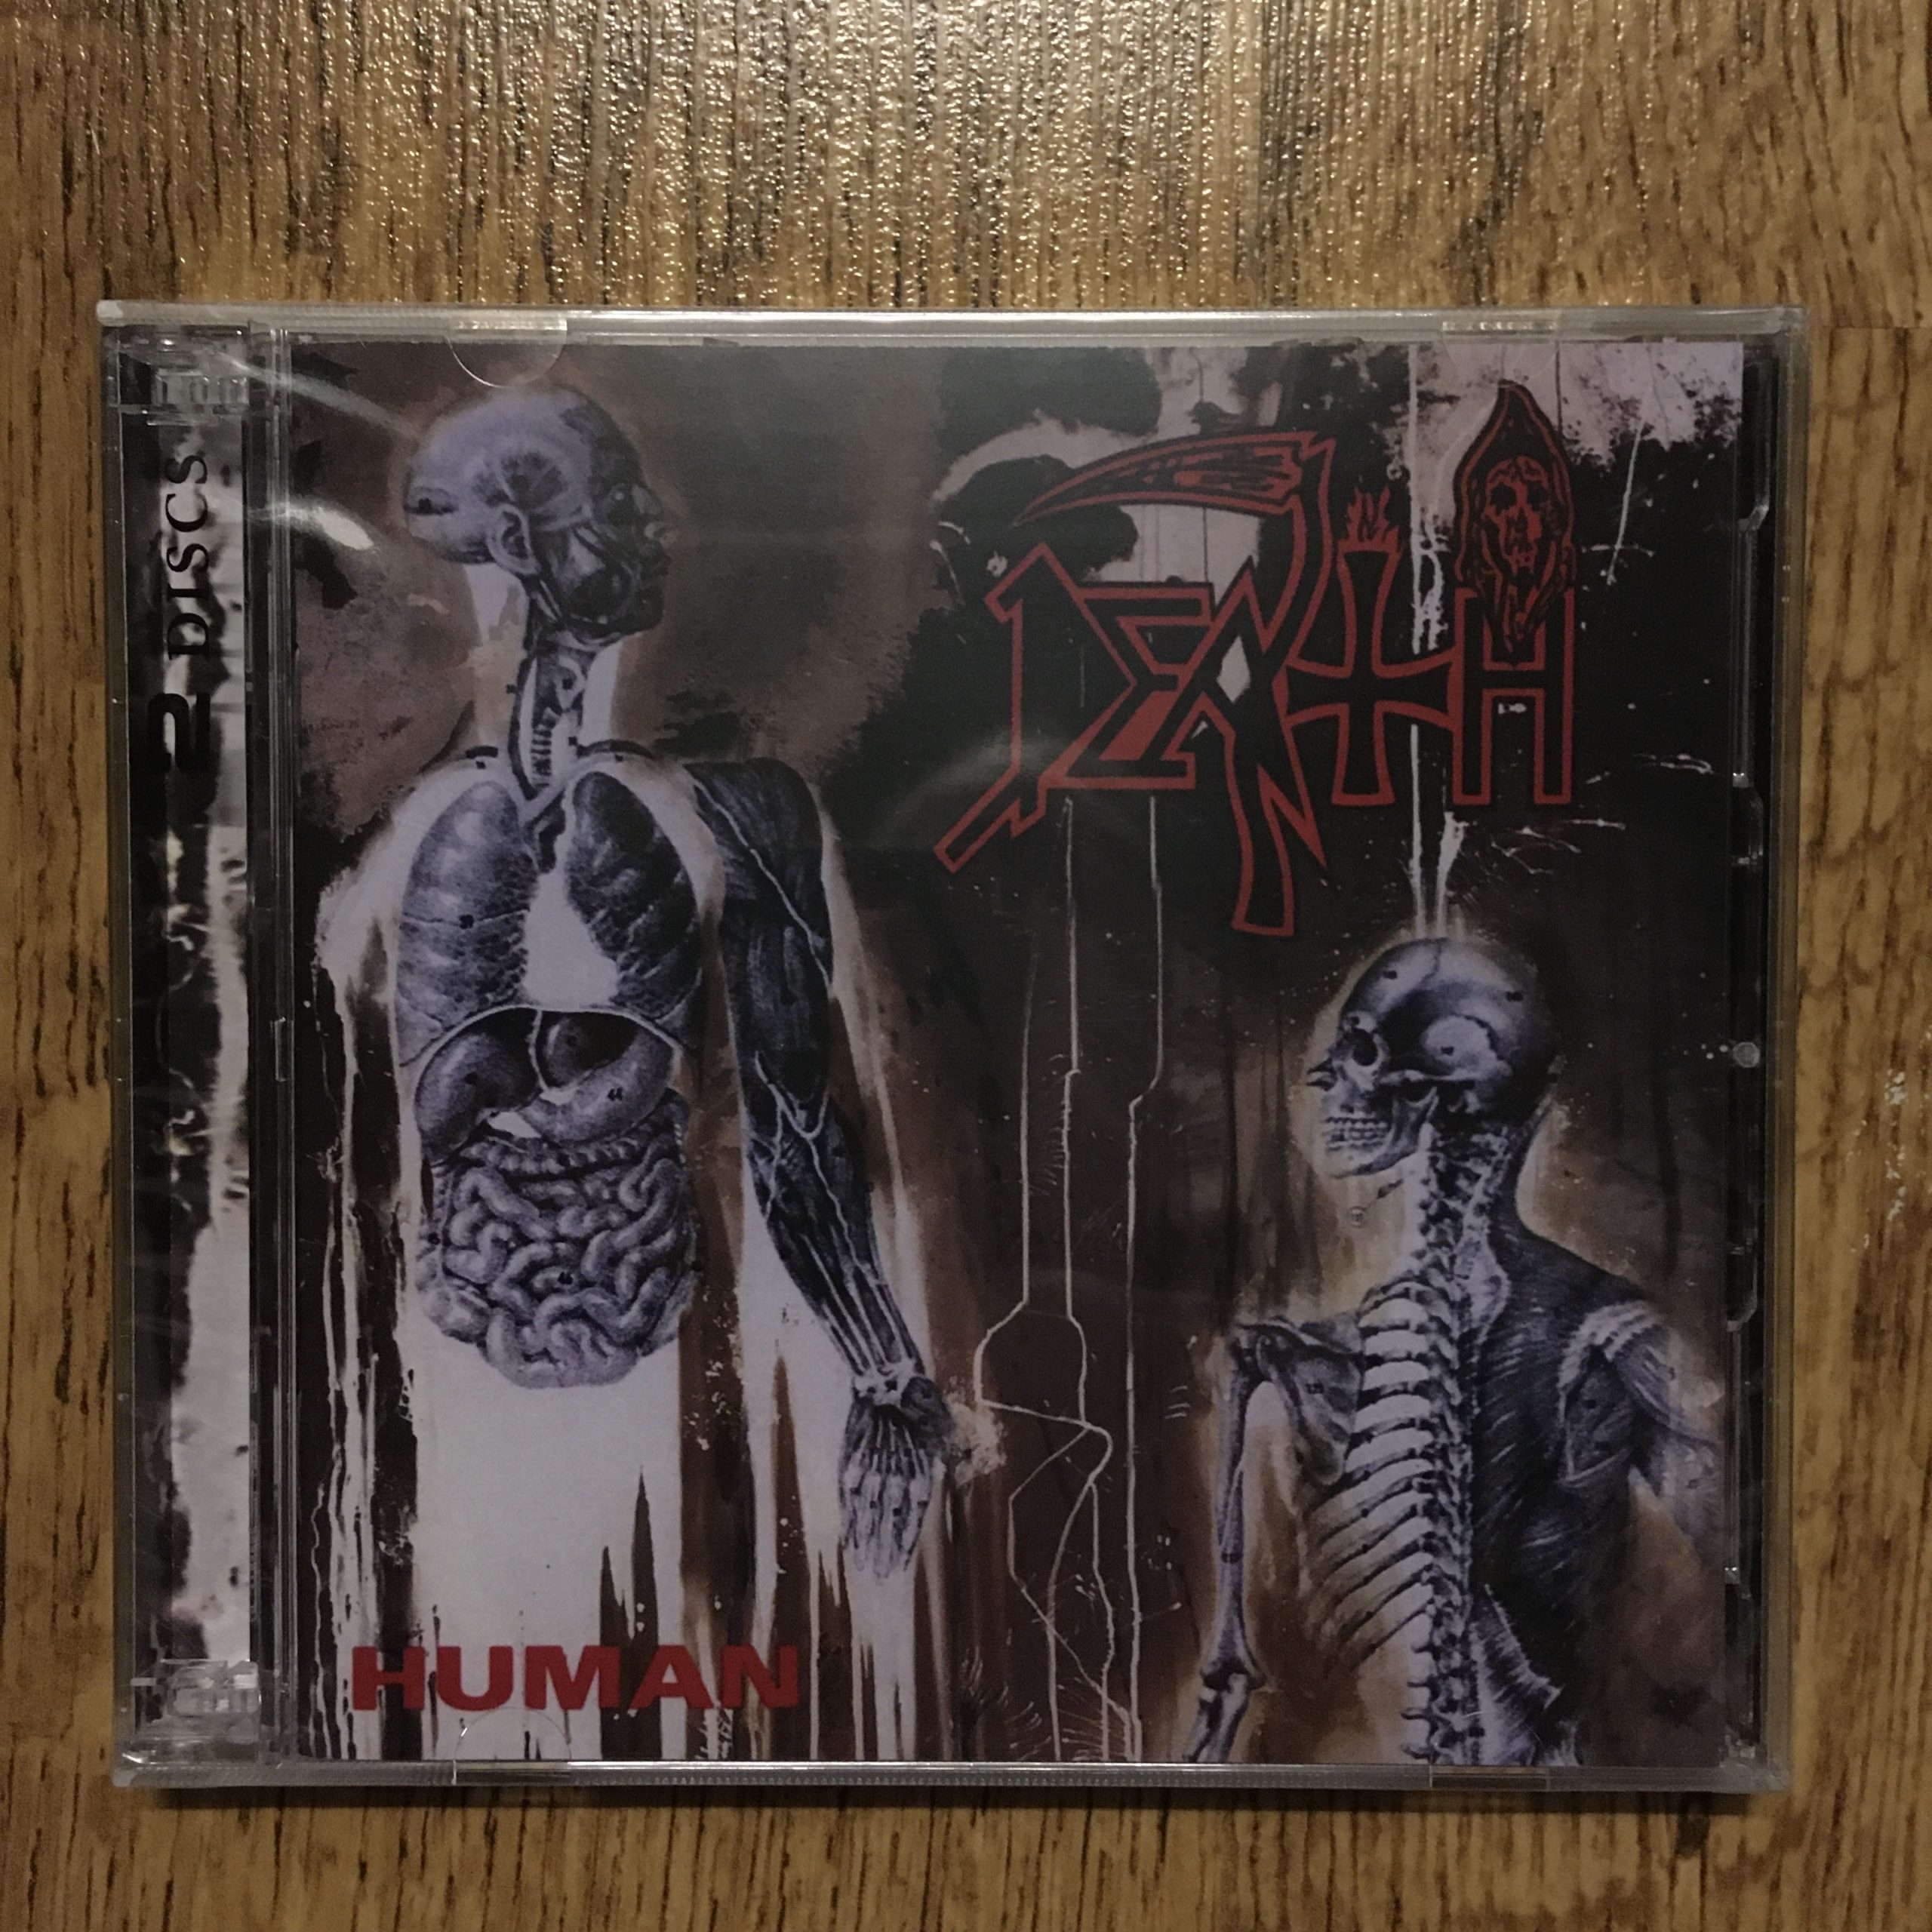 Photo of the Death - "Human" 2CD